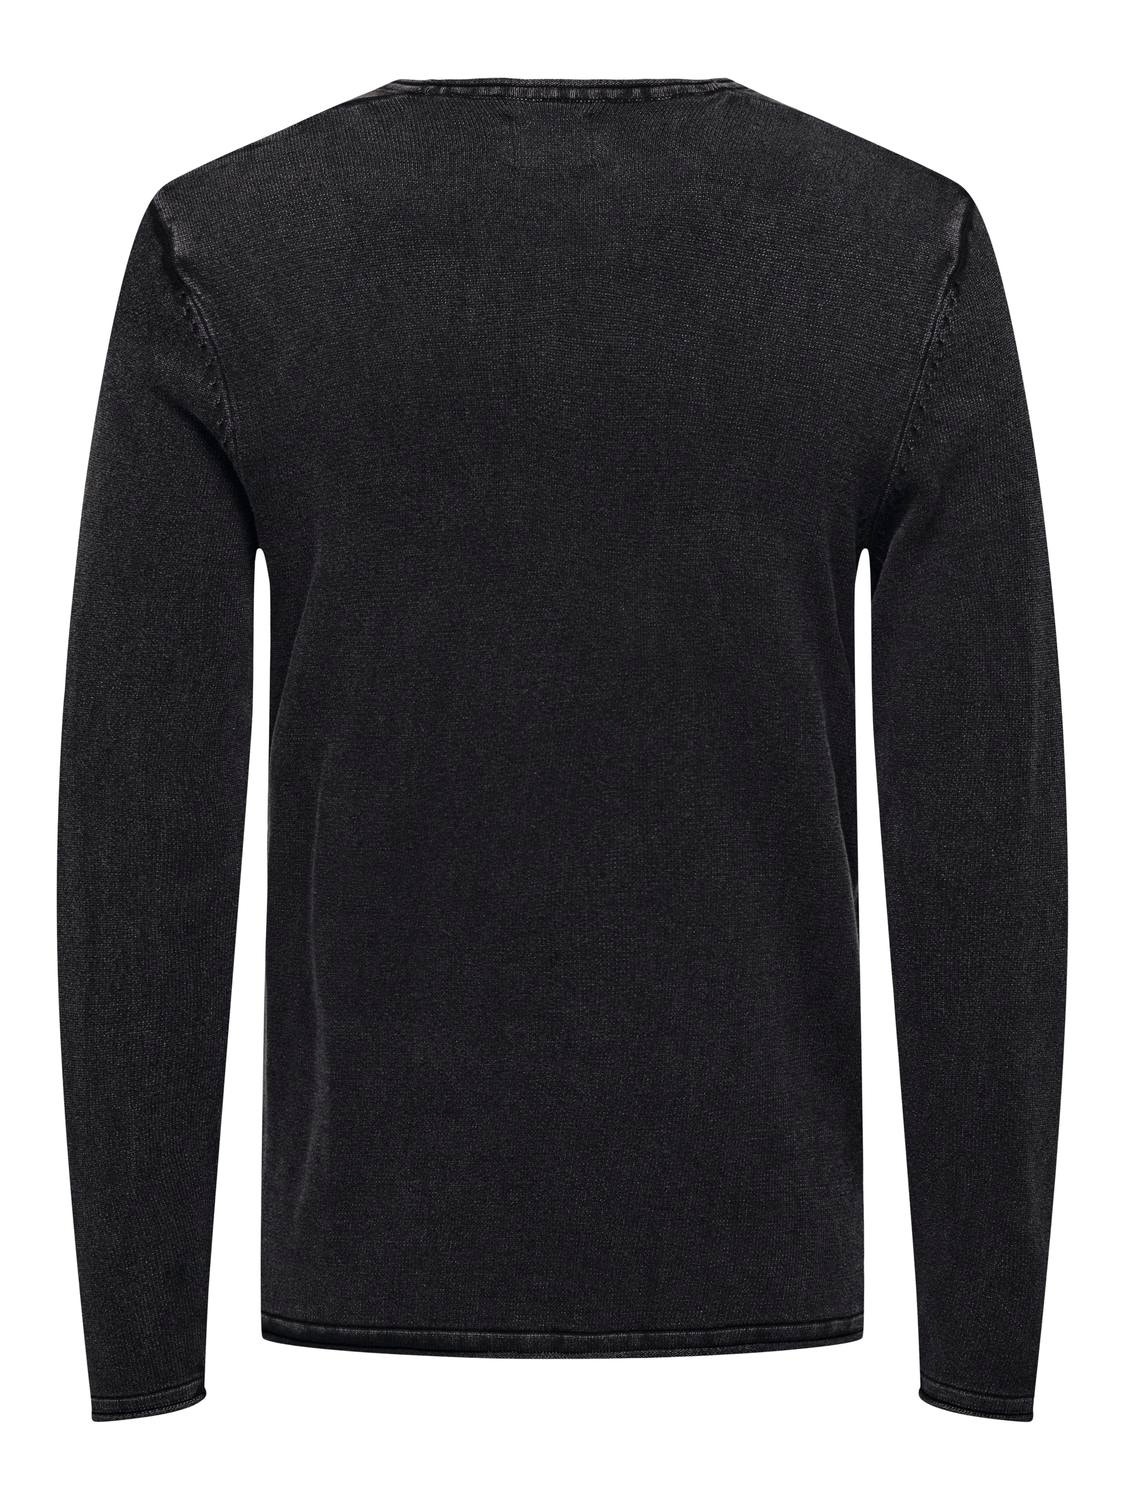 ONLY & SONS Crew neck knitted pullover -Black - 22006806